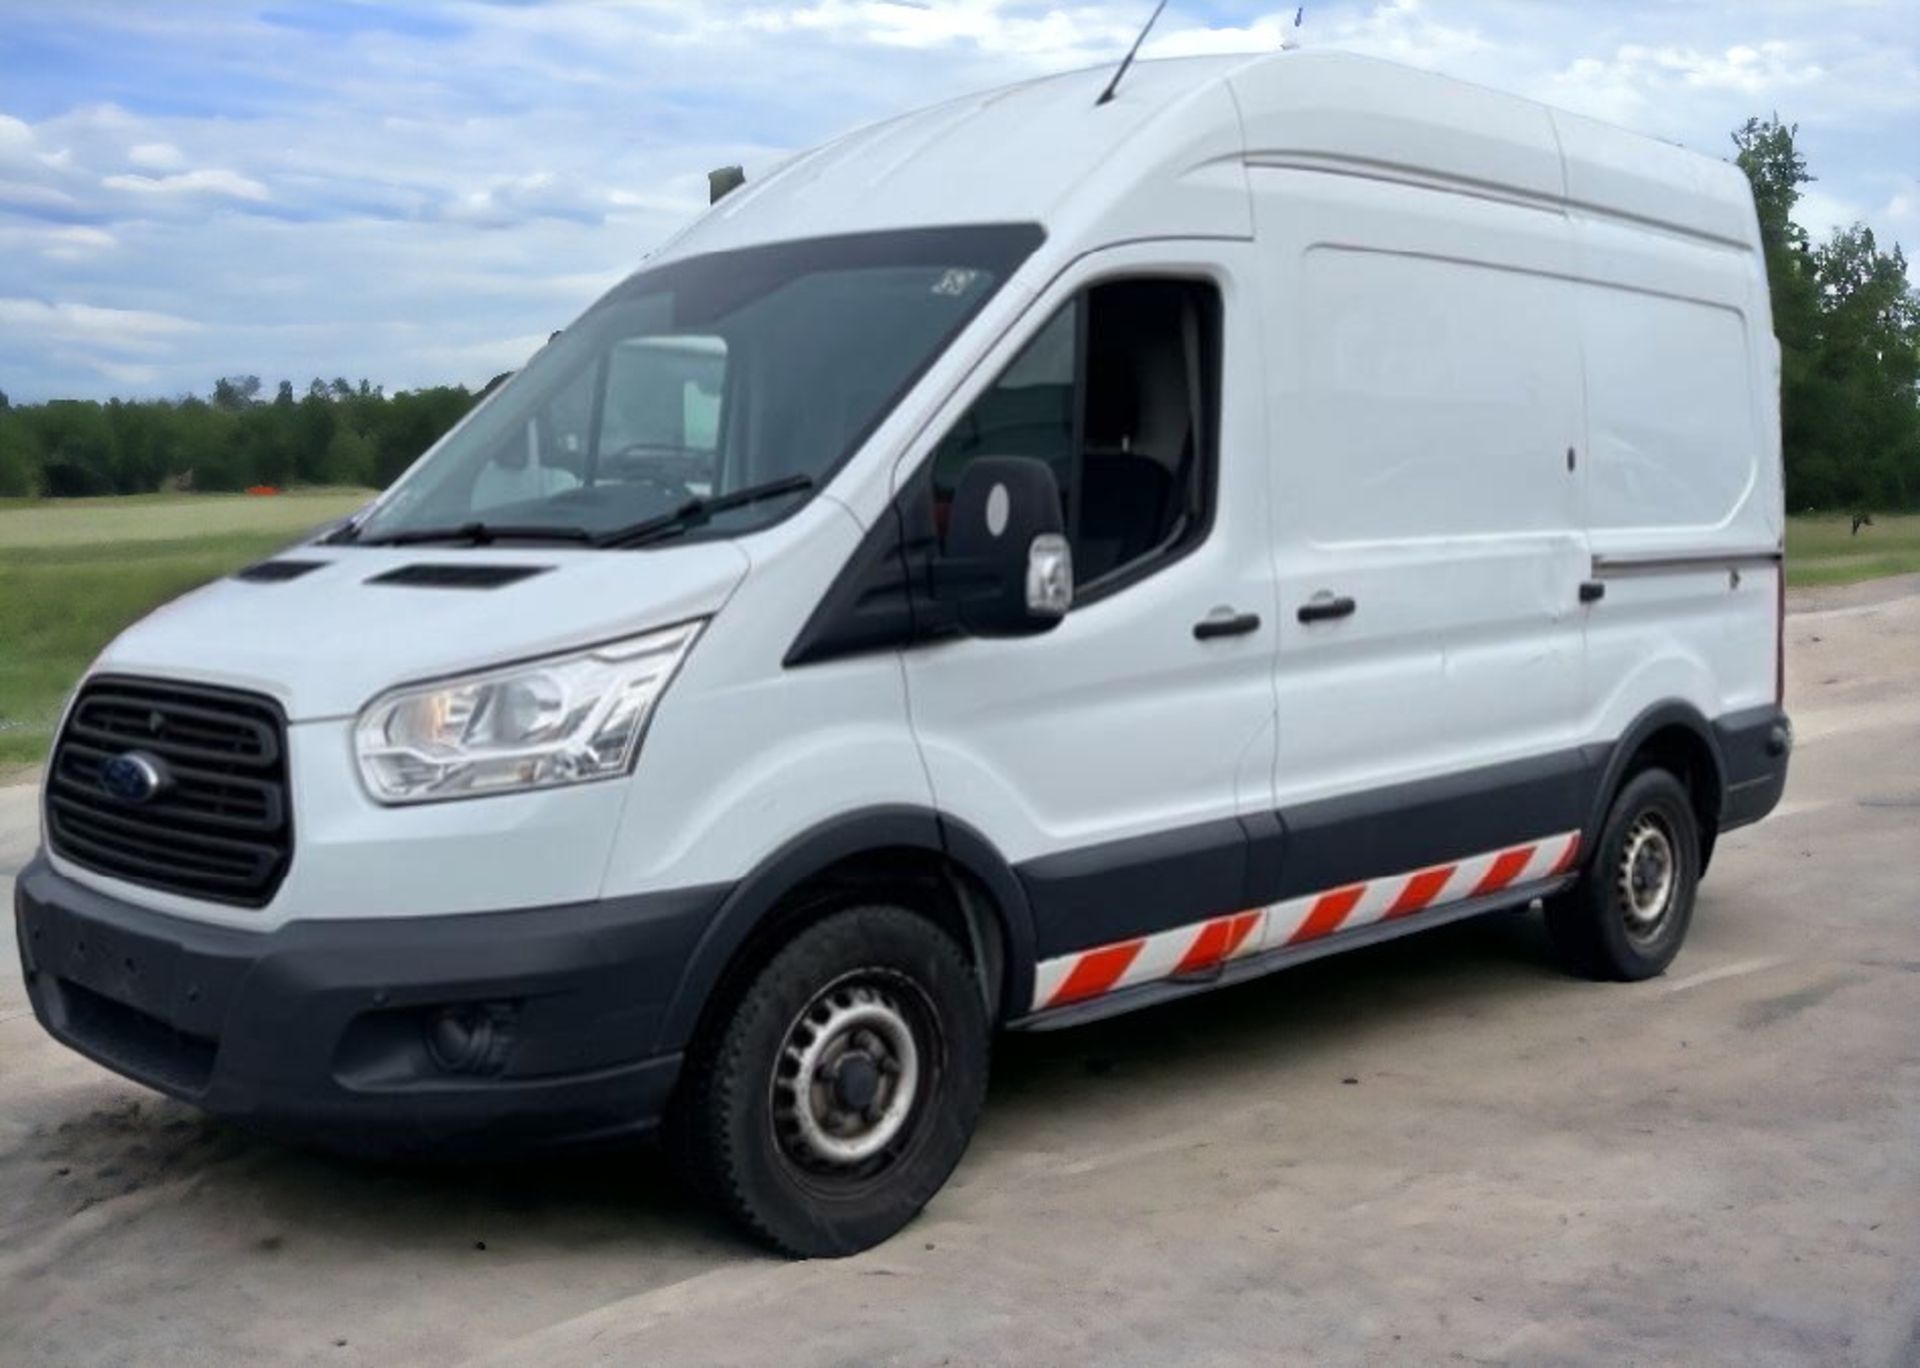 2015 FORD TRANSIT T350 MEDIUM WHEEL BASE - YOUR RELIABLE WORKHORSE - Image 5 of 14